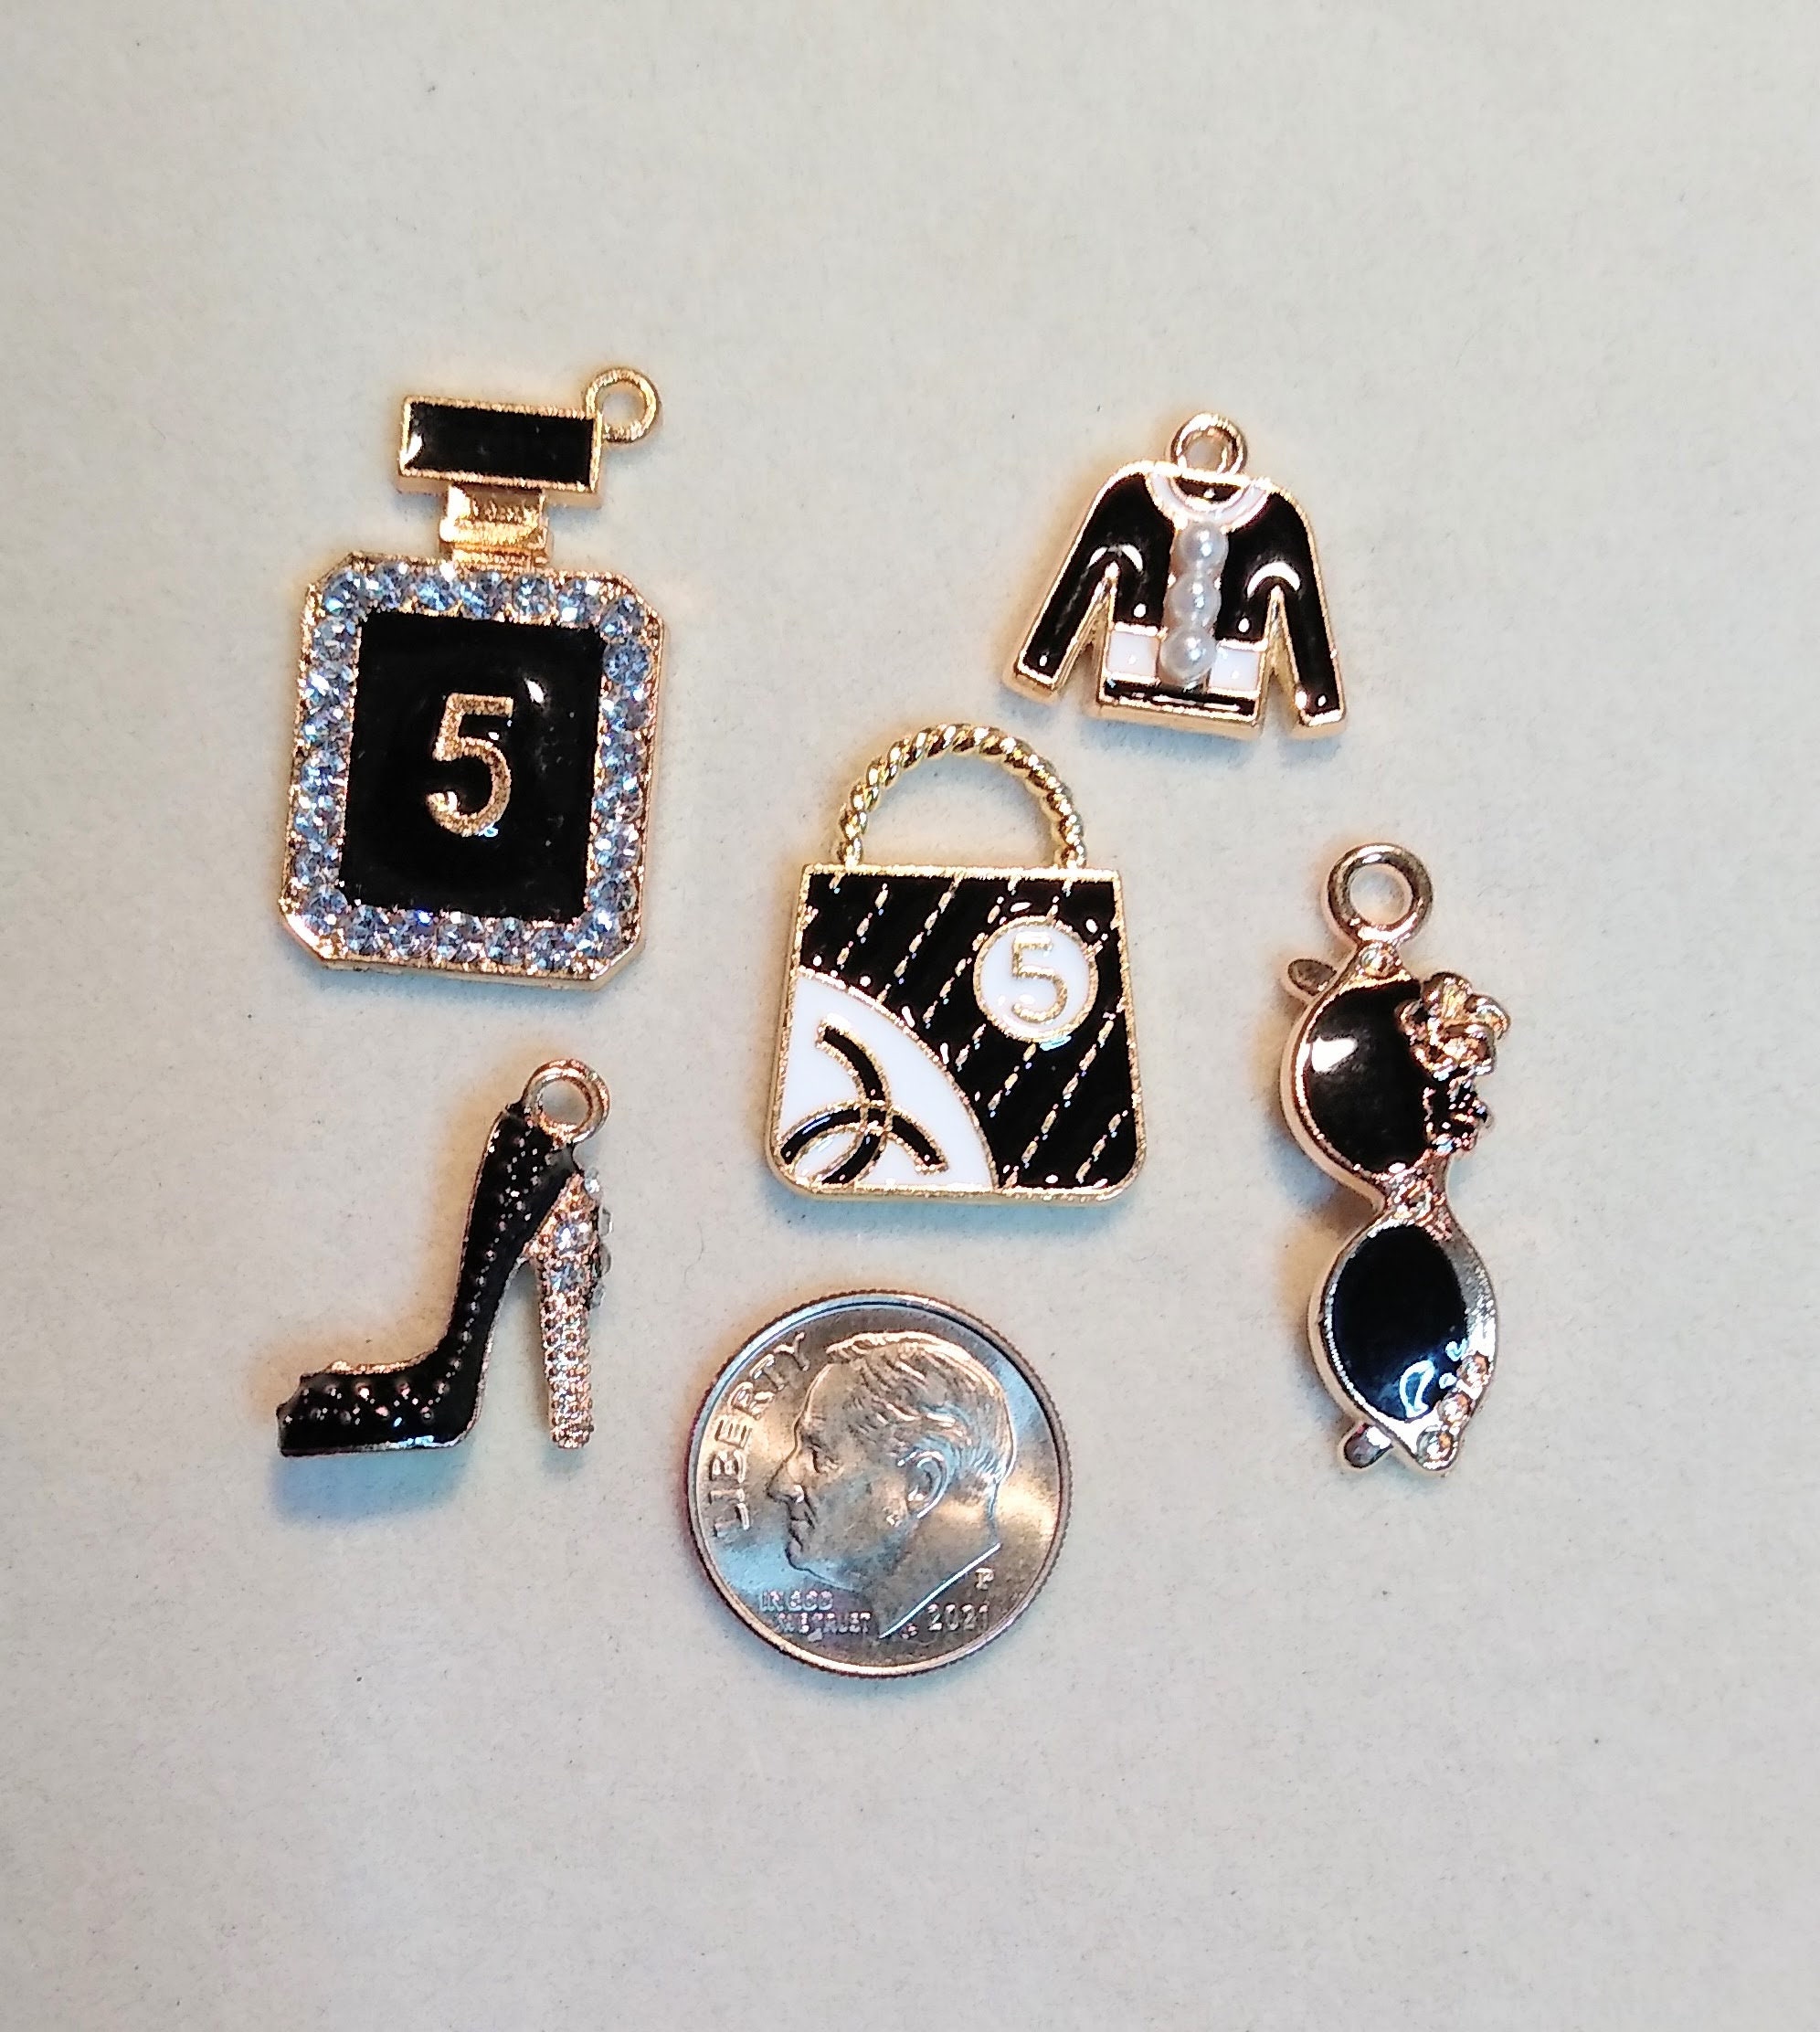 Black and White Enamel and Gold Fashion Charm Group of 5 